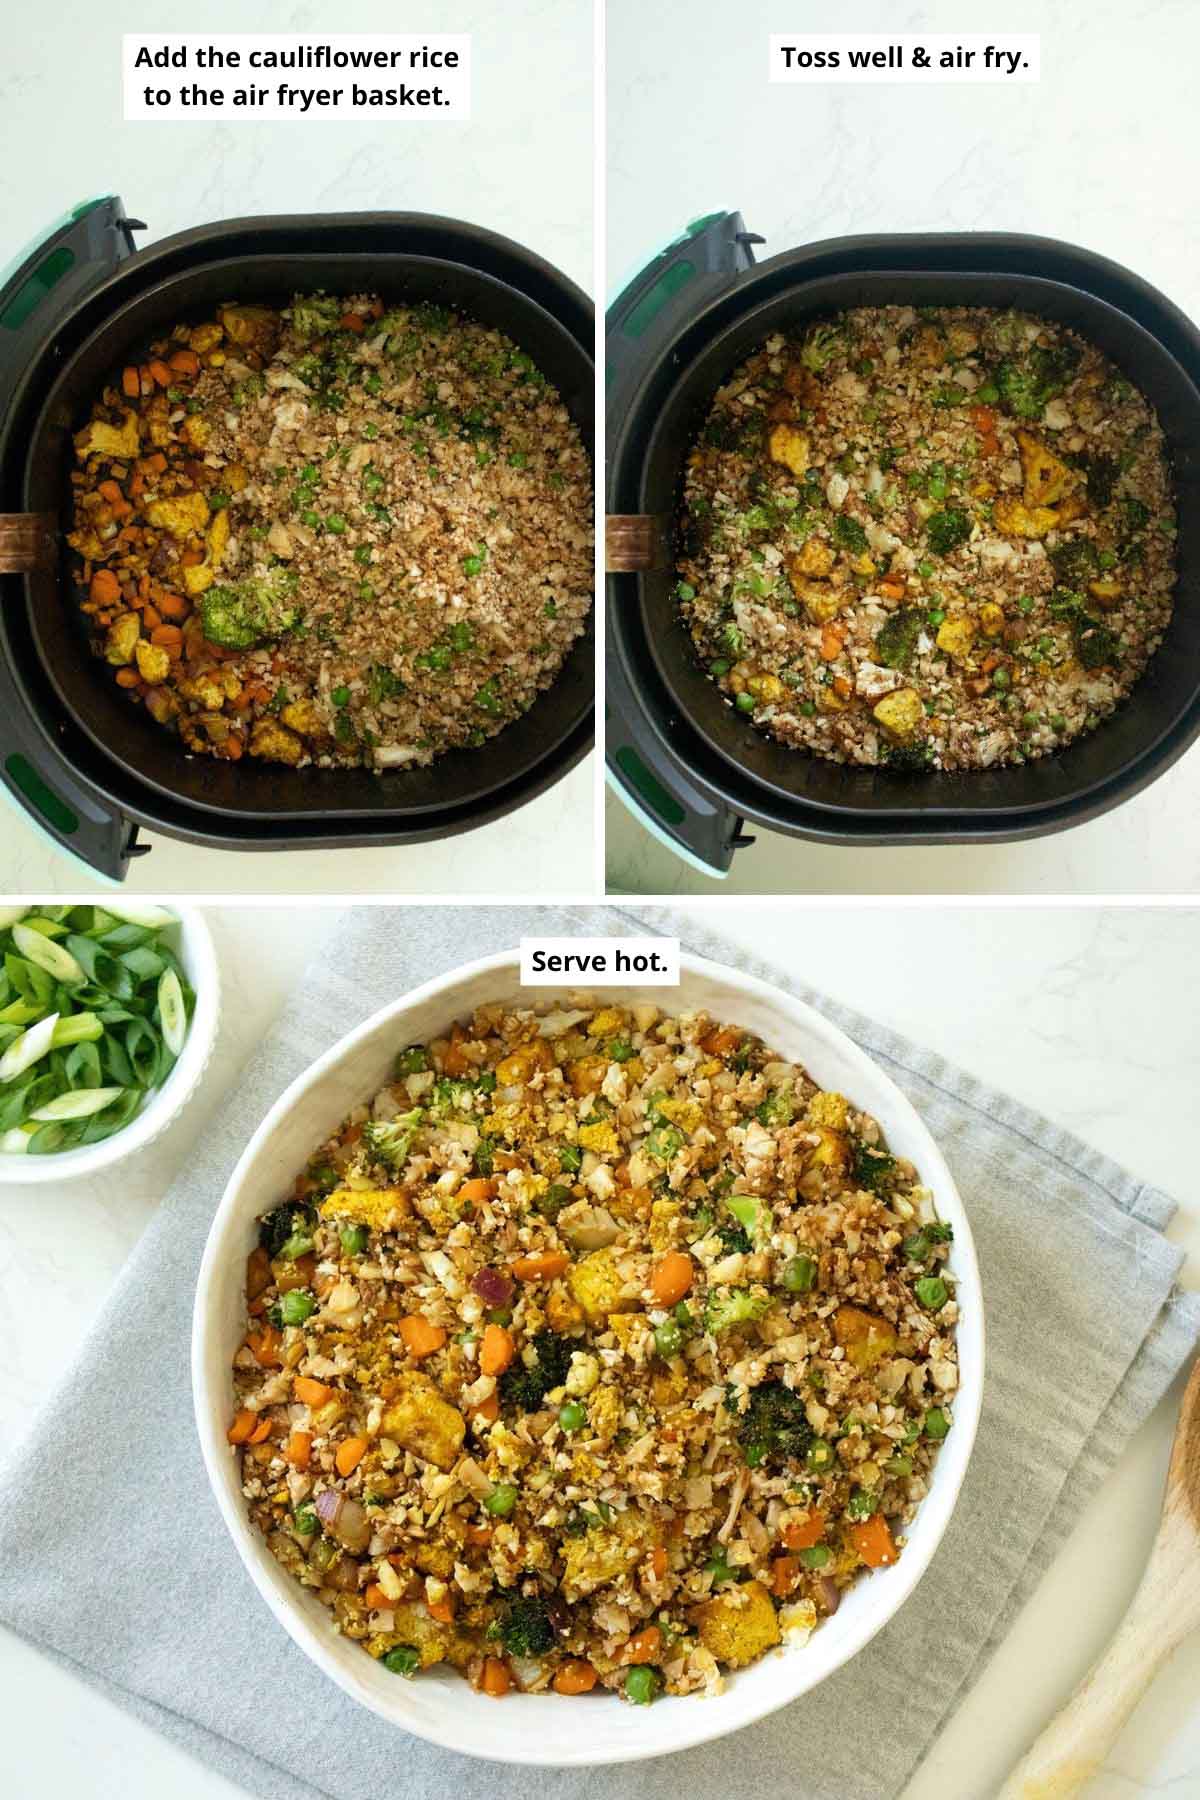 image collage showing the cauliflower rice in the air fryer before and after mixing and in a bowl after cooking